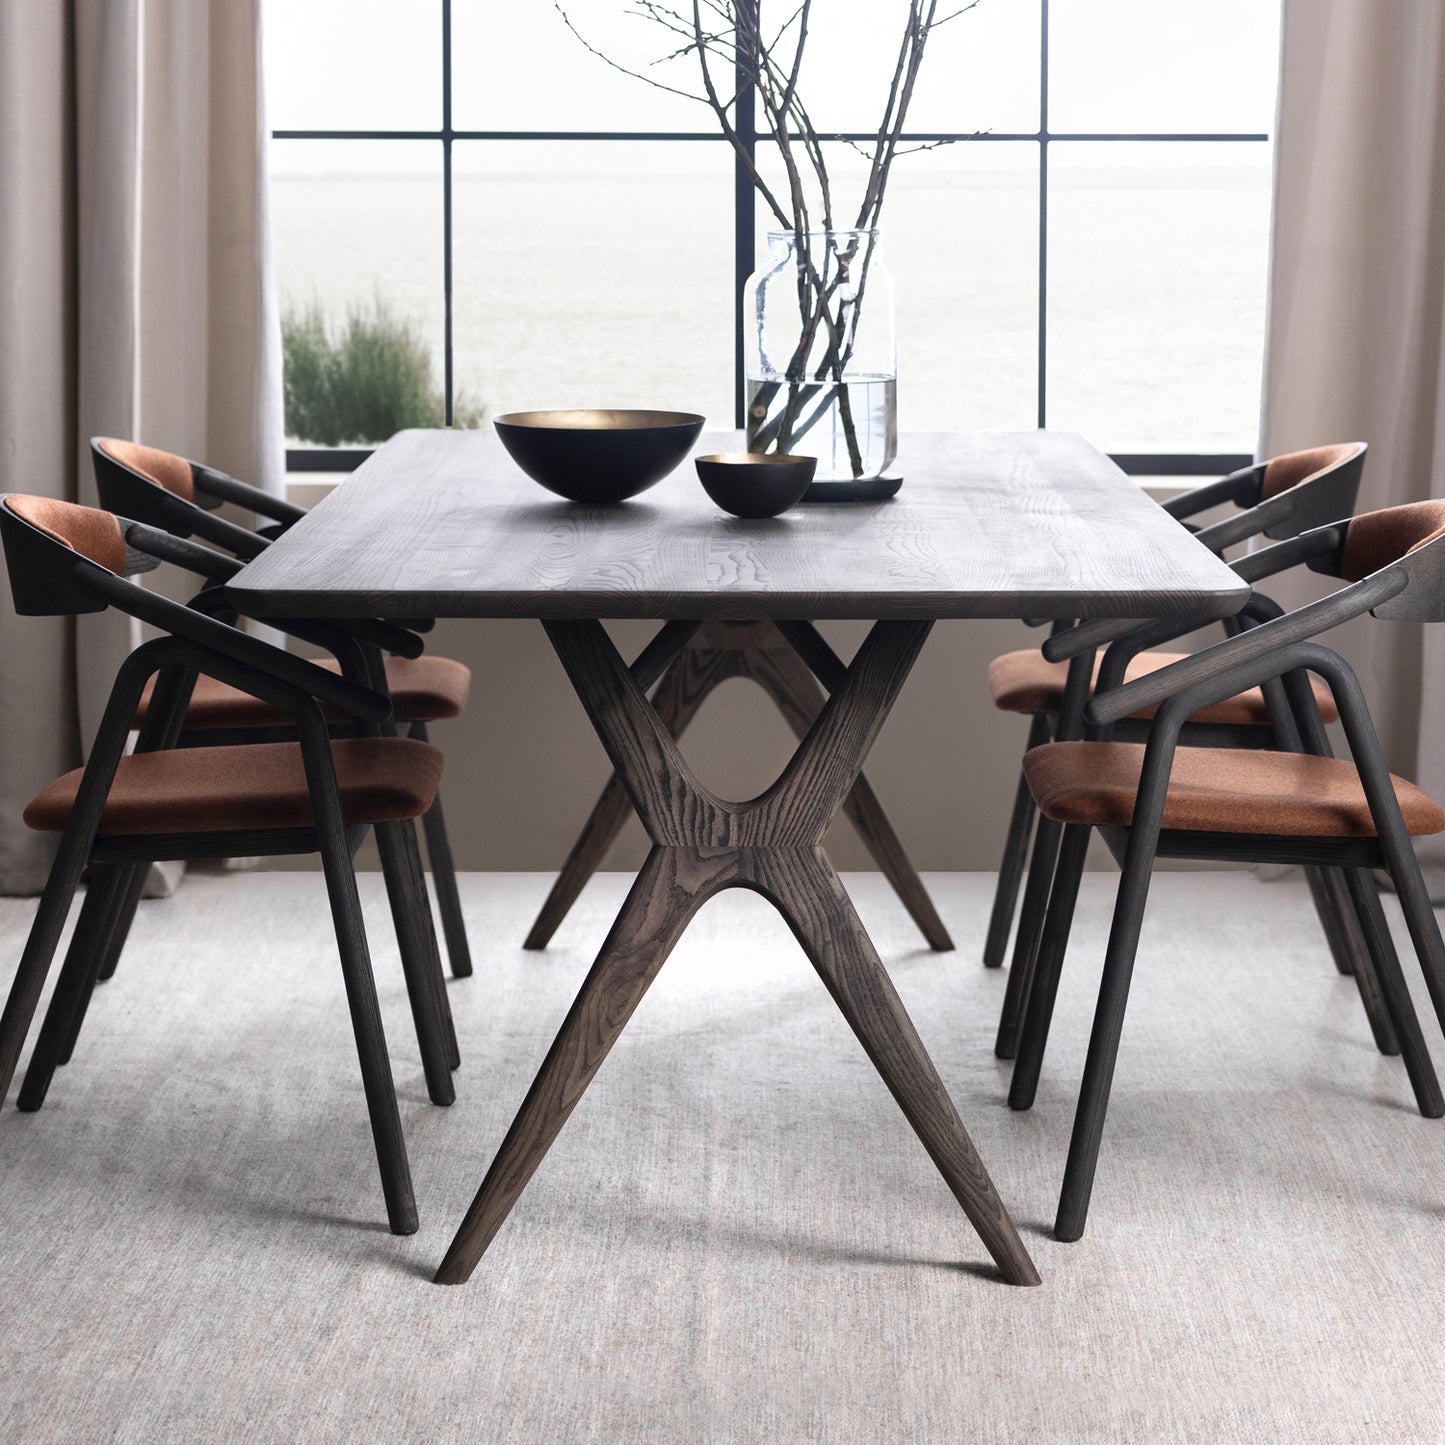 Rose Hill Ash Dining Table With Rounded Corners With Brass - 180cm Extending